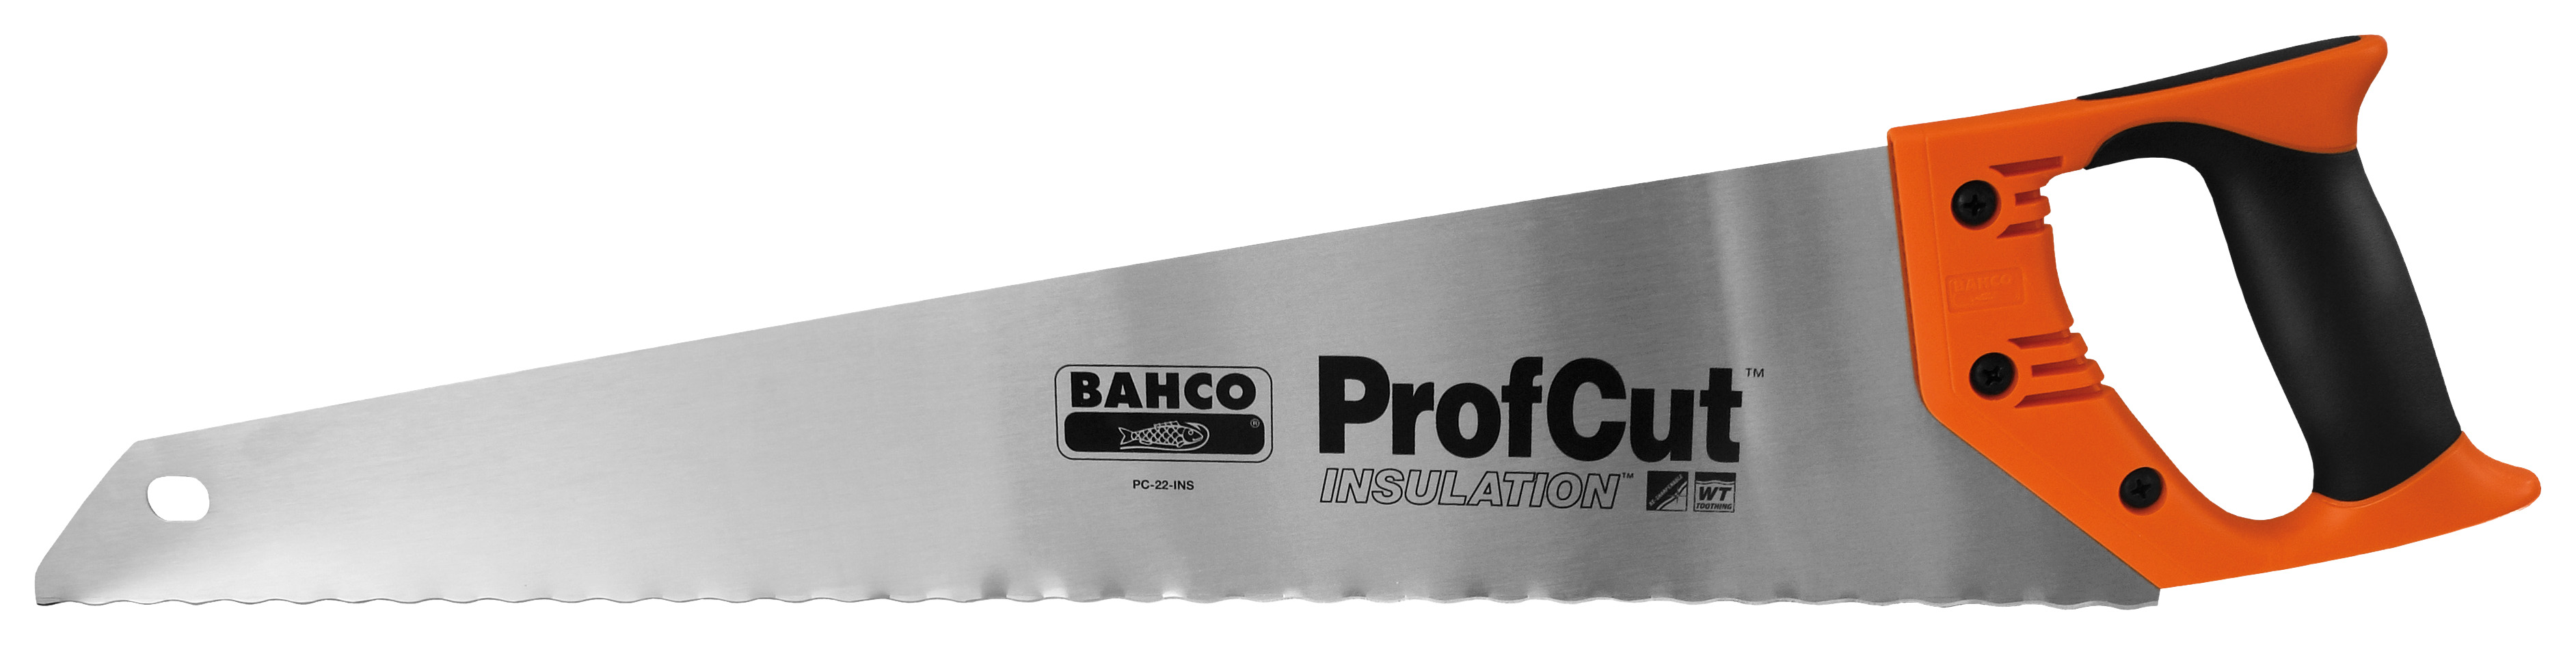 Bahco PC-22-INS Profcut Insulation Saw - 22in / 550mm